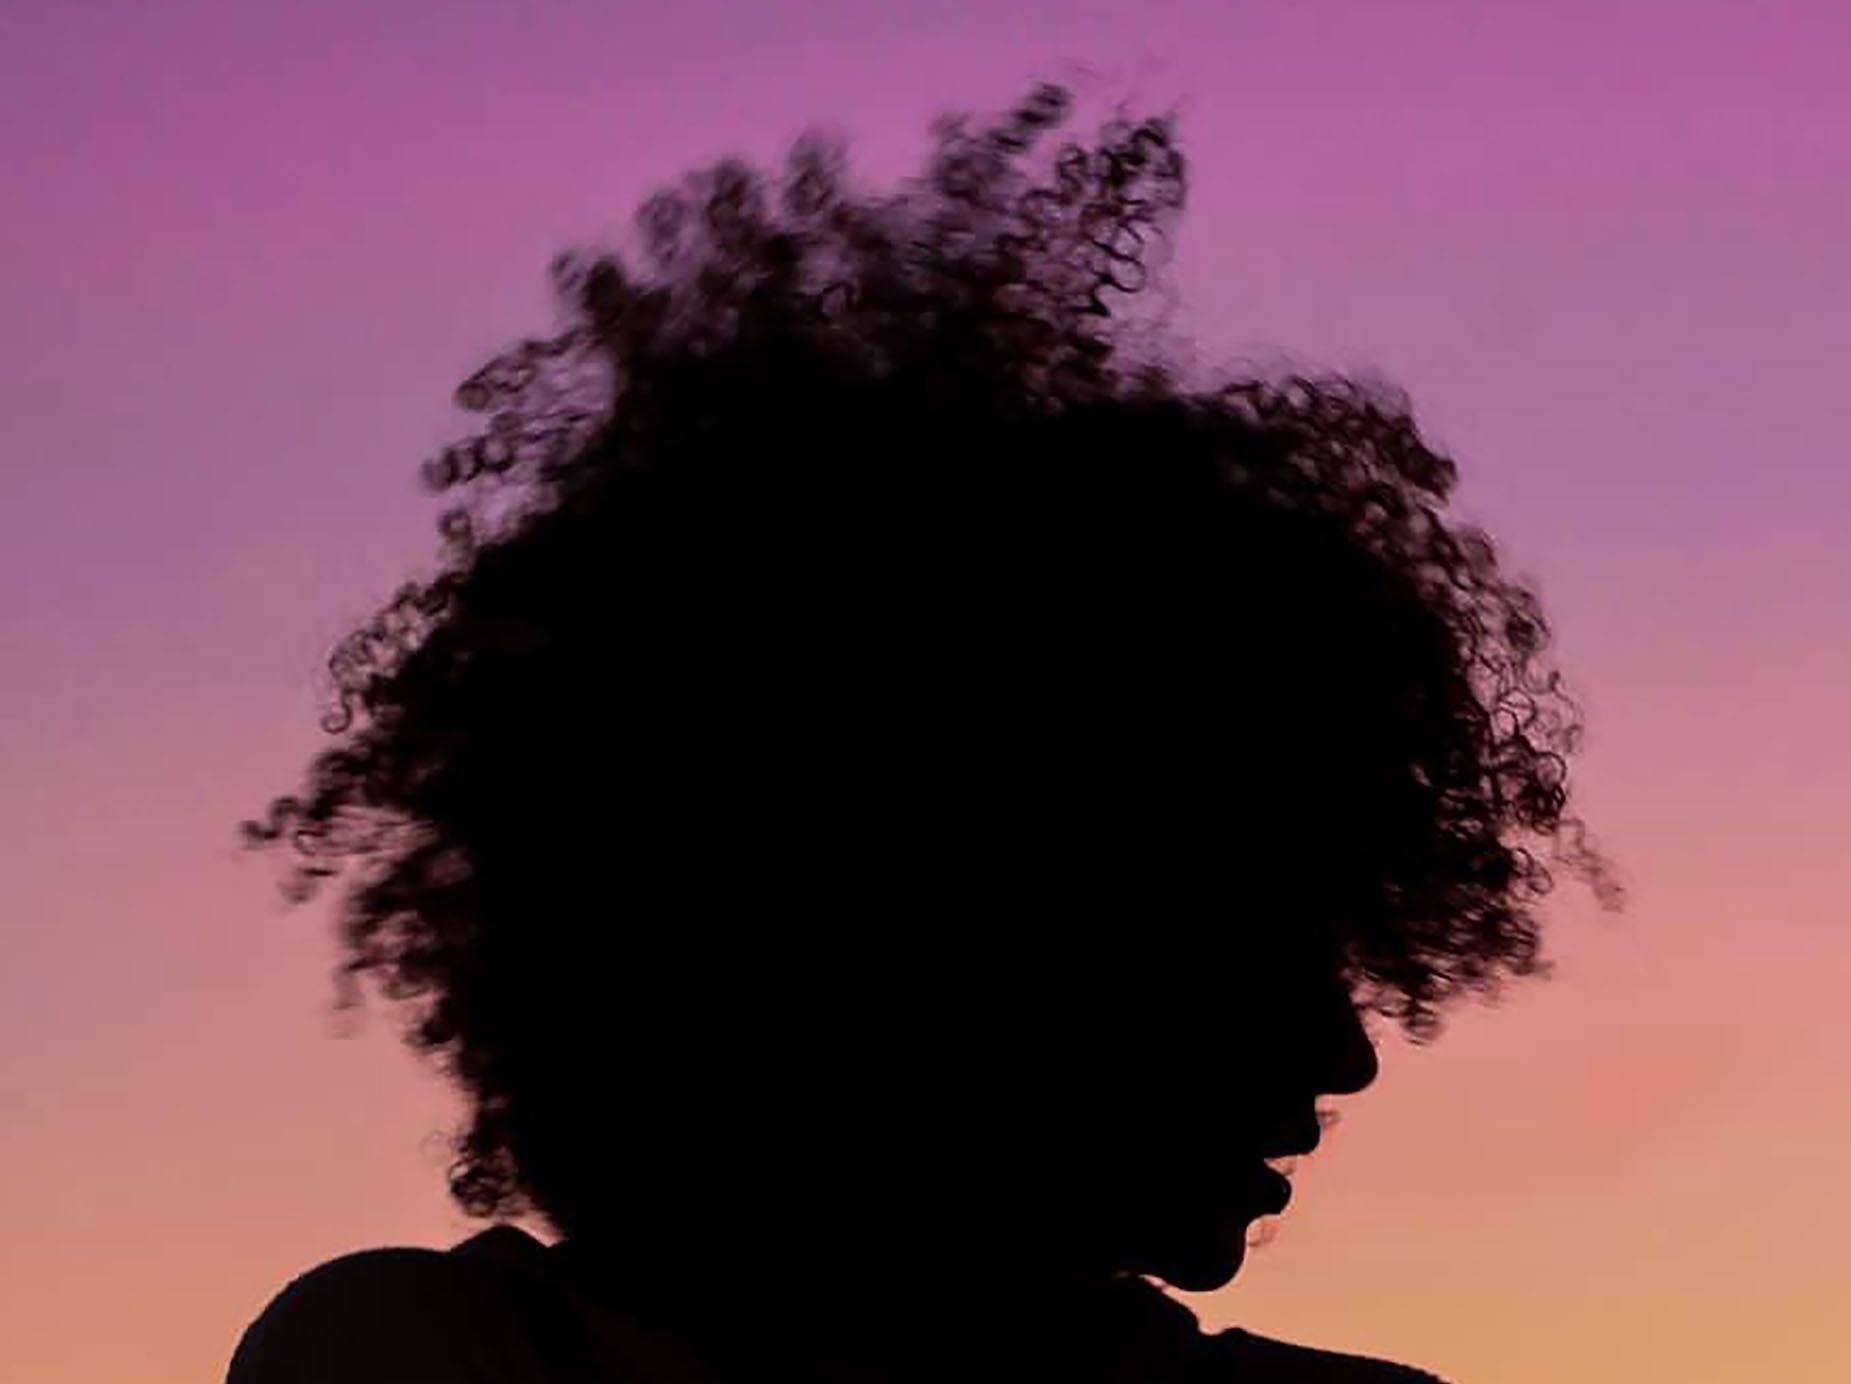 A woman's face, silhouetted against the sky, her curly hair outlined by red and purple hues of the sunset.